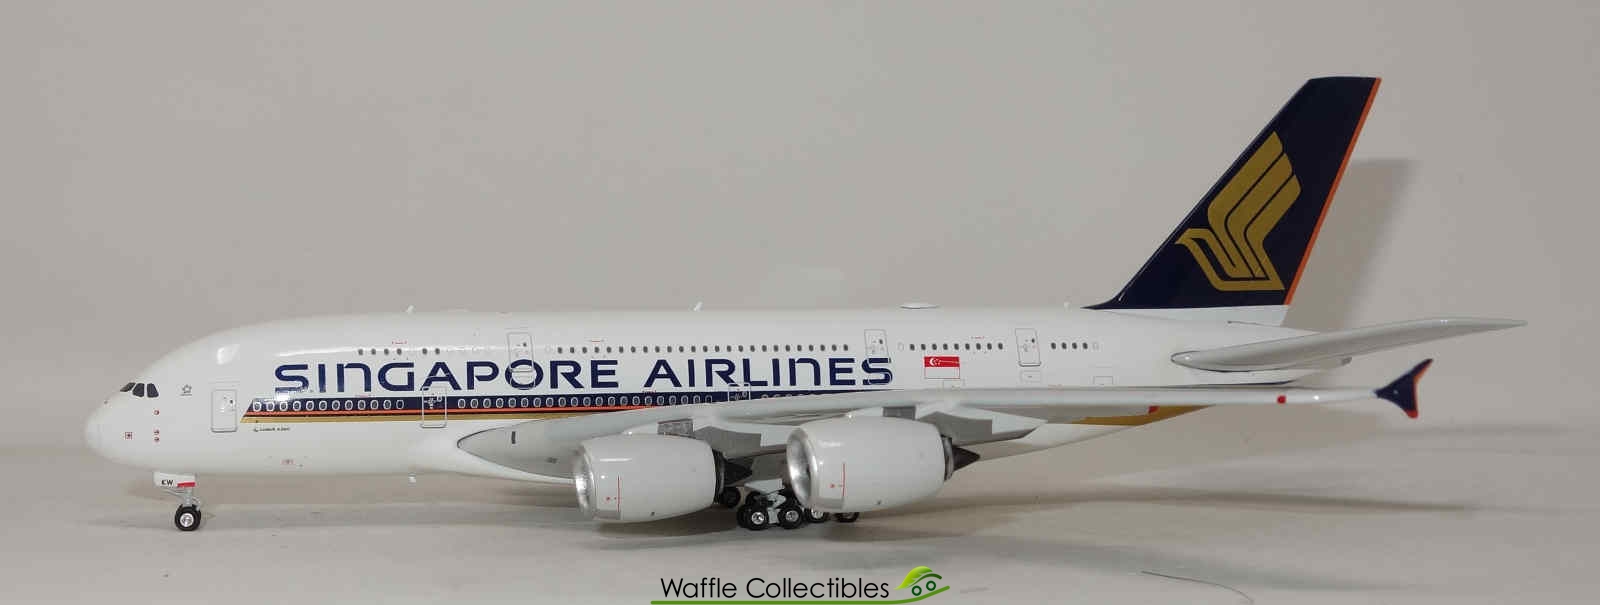 1:400 Phoenix Models Singapore Airlines Airbus Industries A380-800